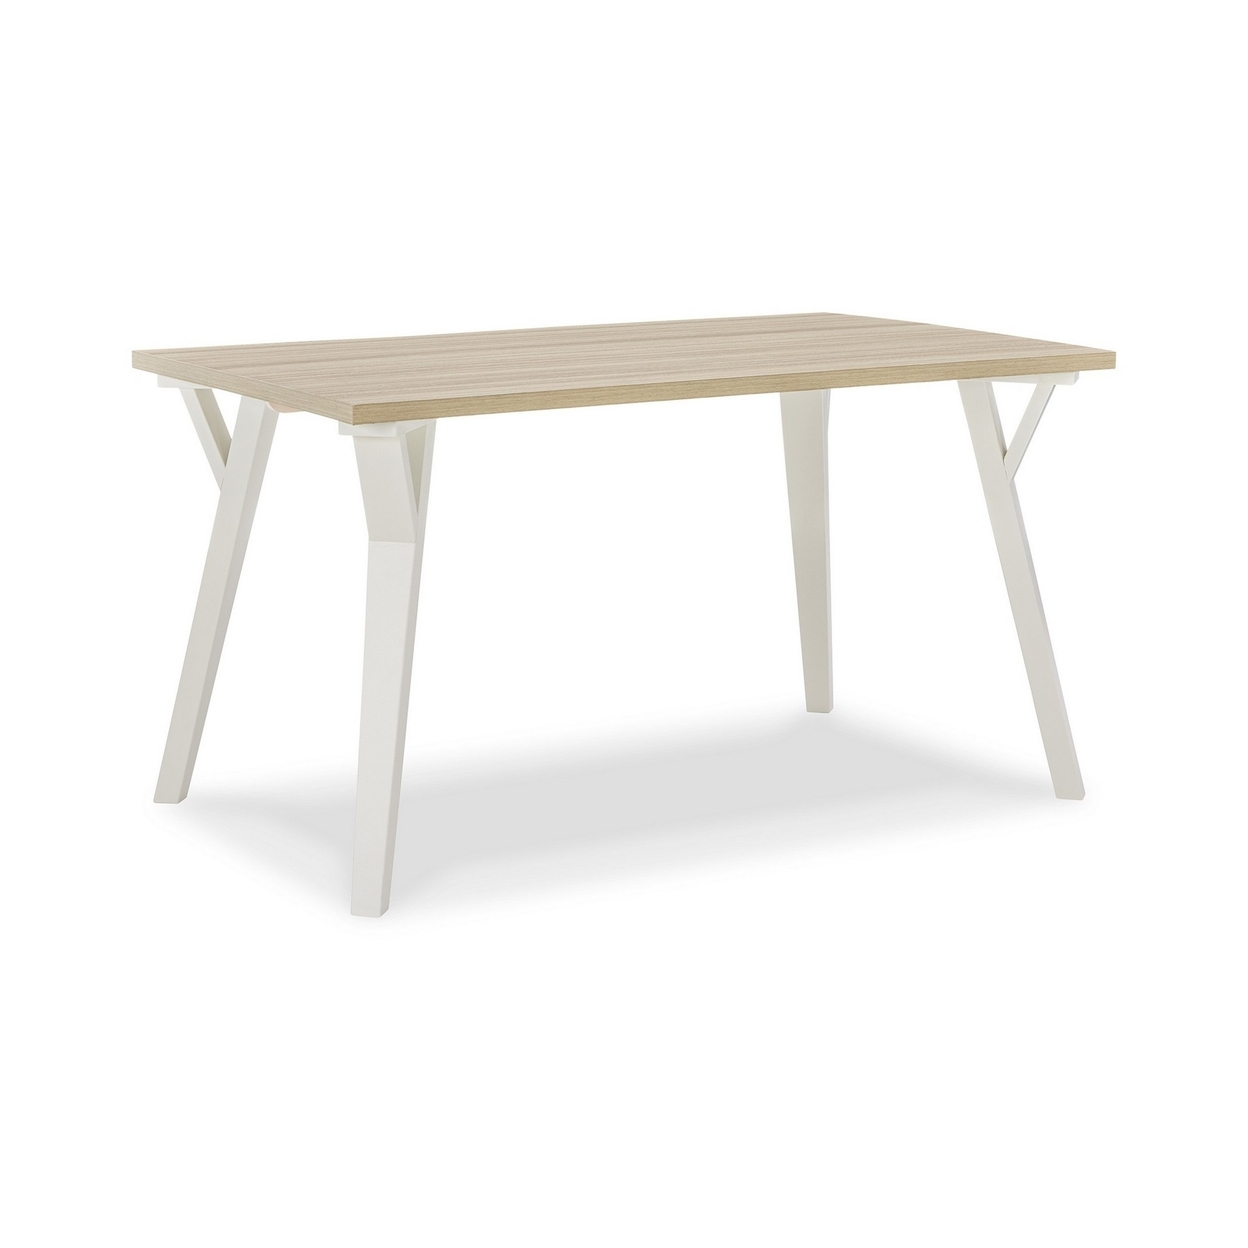 Quip 55 Inch Dining Table, White Wood, Smooth Melamine Surface, Angled Legs- Saltoro Sherpi